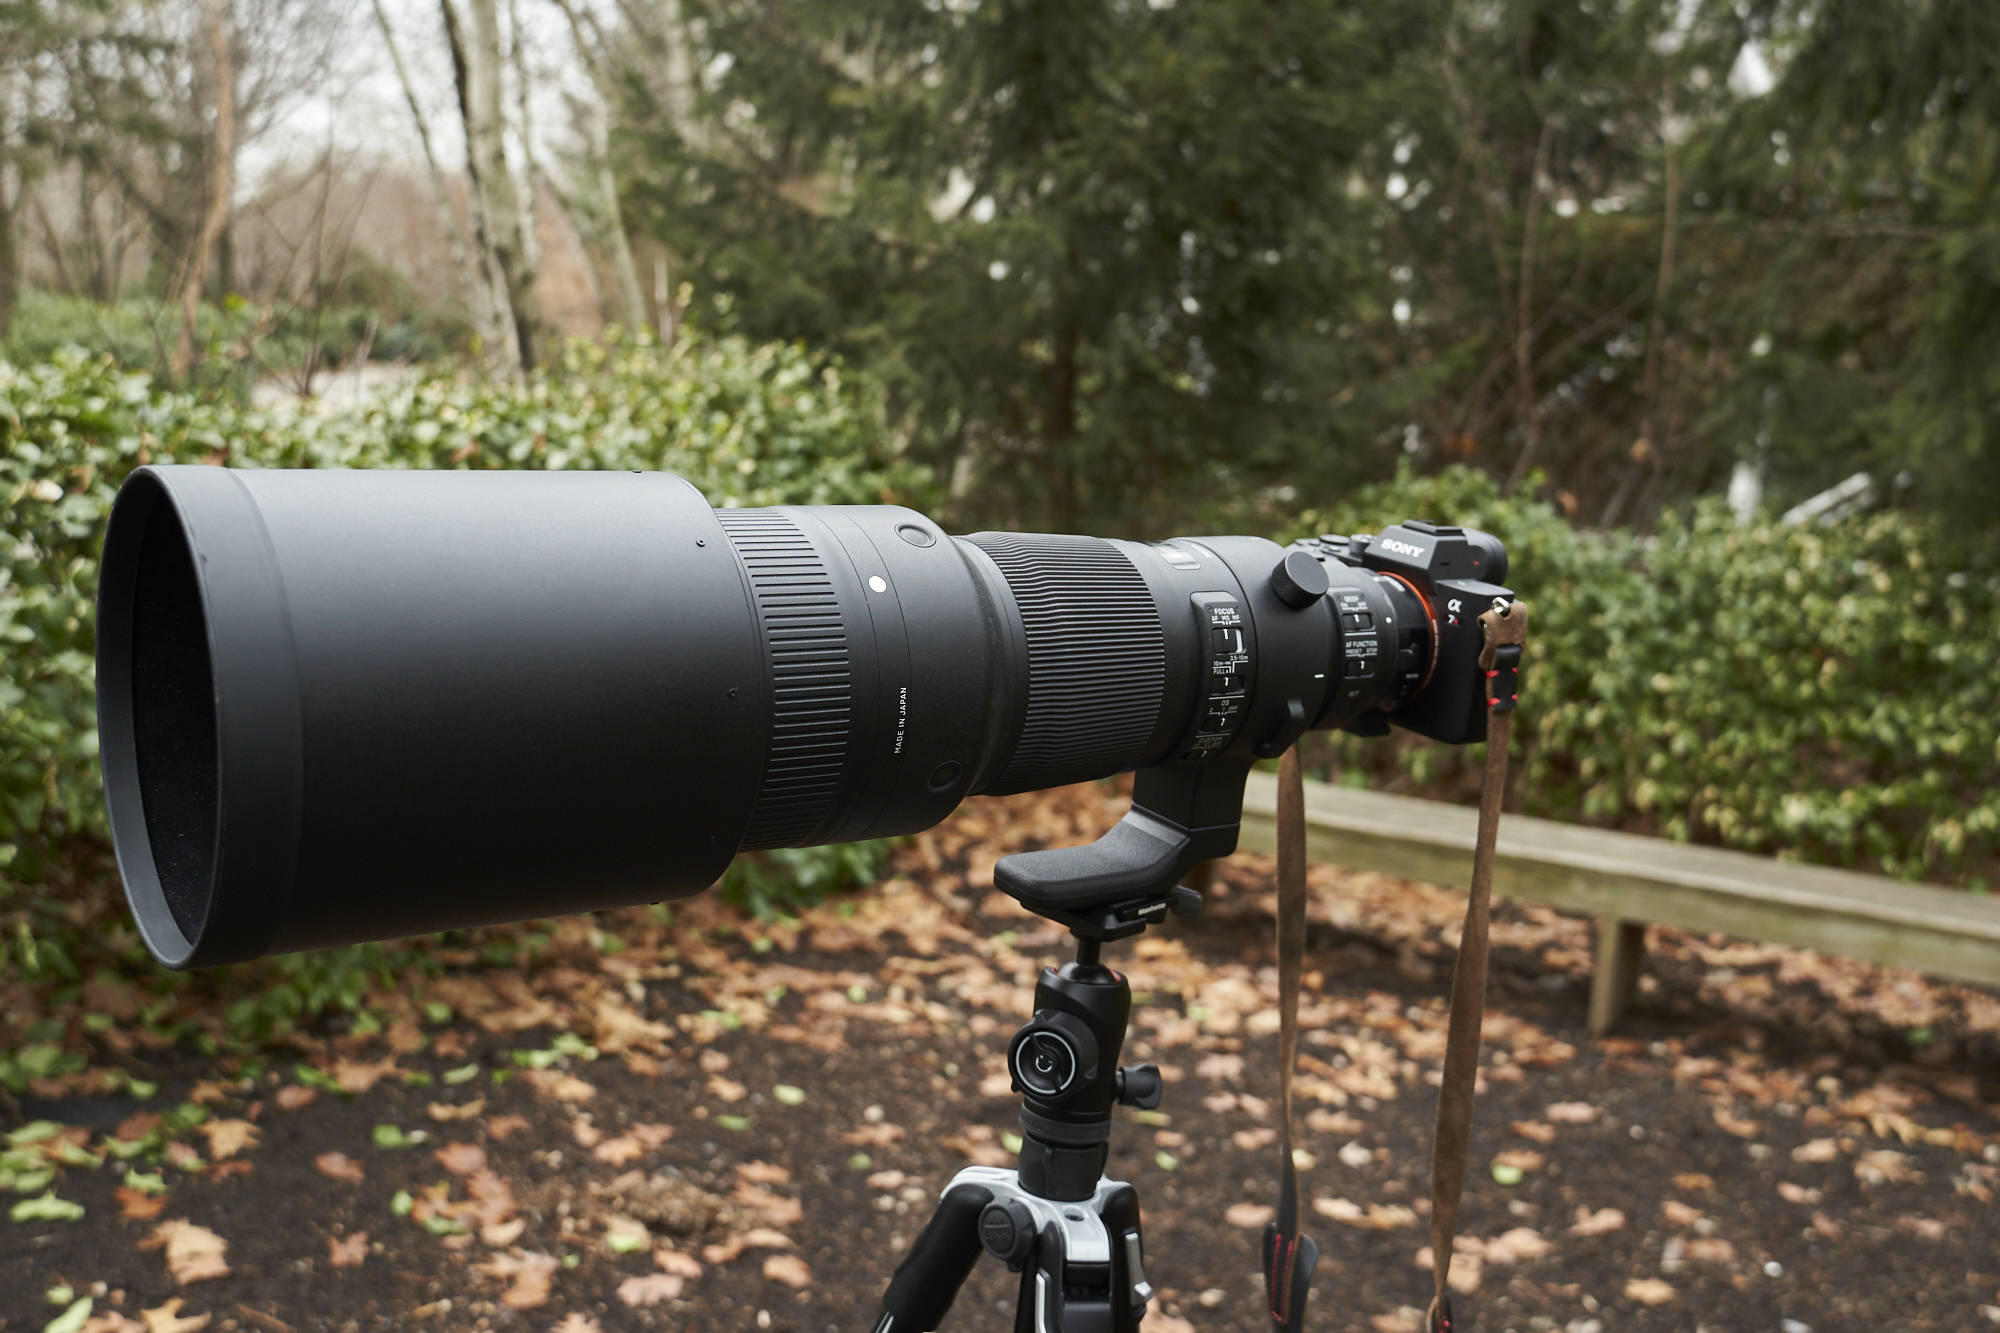 Review: Sigma 500mm f4 DG OS HSM Sports (Canon EF Mount, Adapted to Sony FE)